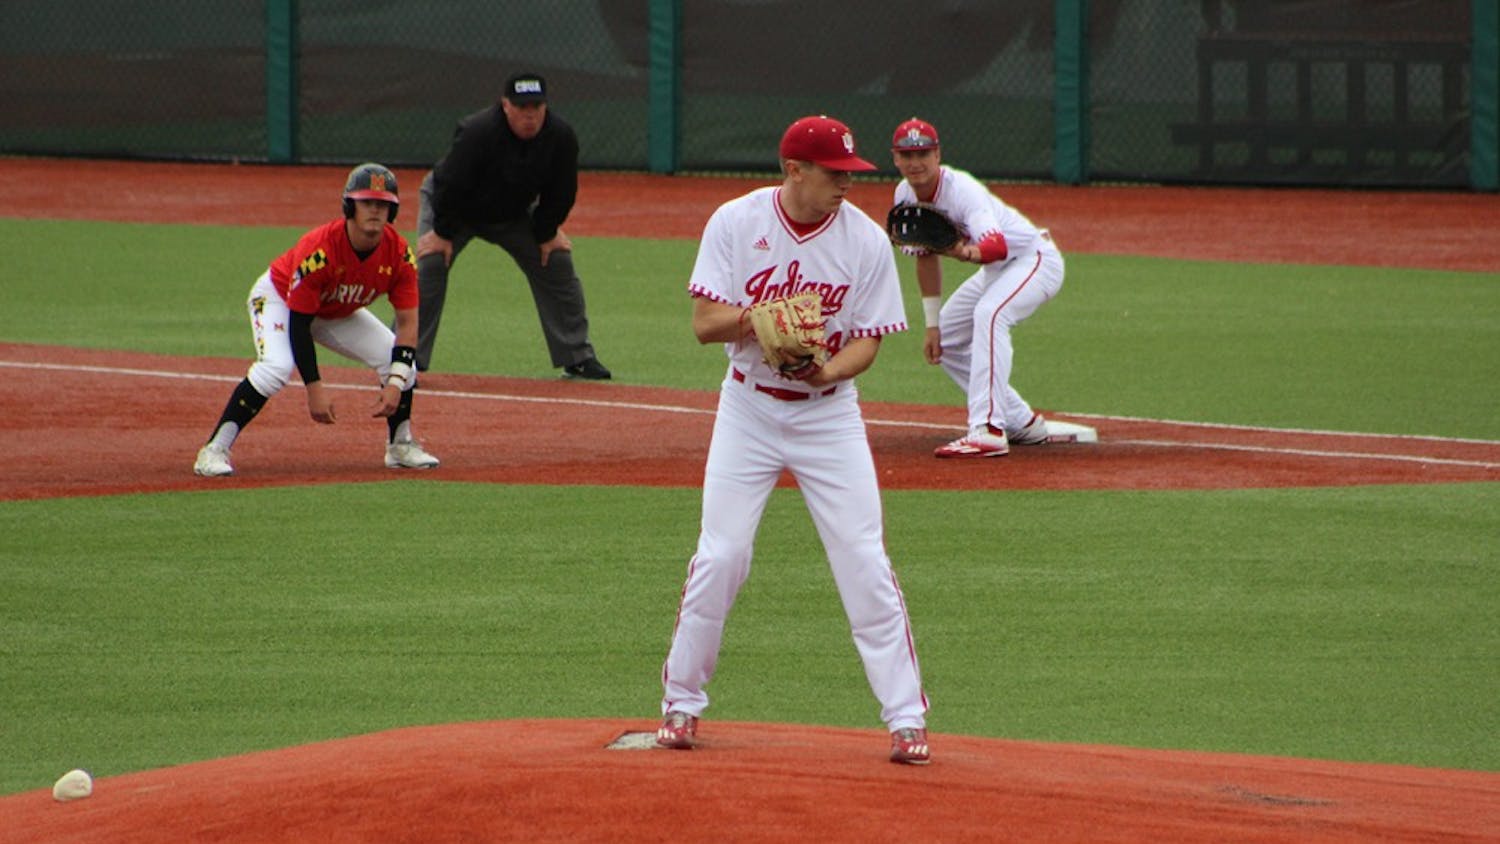 Sophomore starter Jonathan Stiever tries to hold on a baserunner in his start Friday vs. the Maryland Terrapins. The runner was later picked off before the lightning delay.